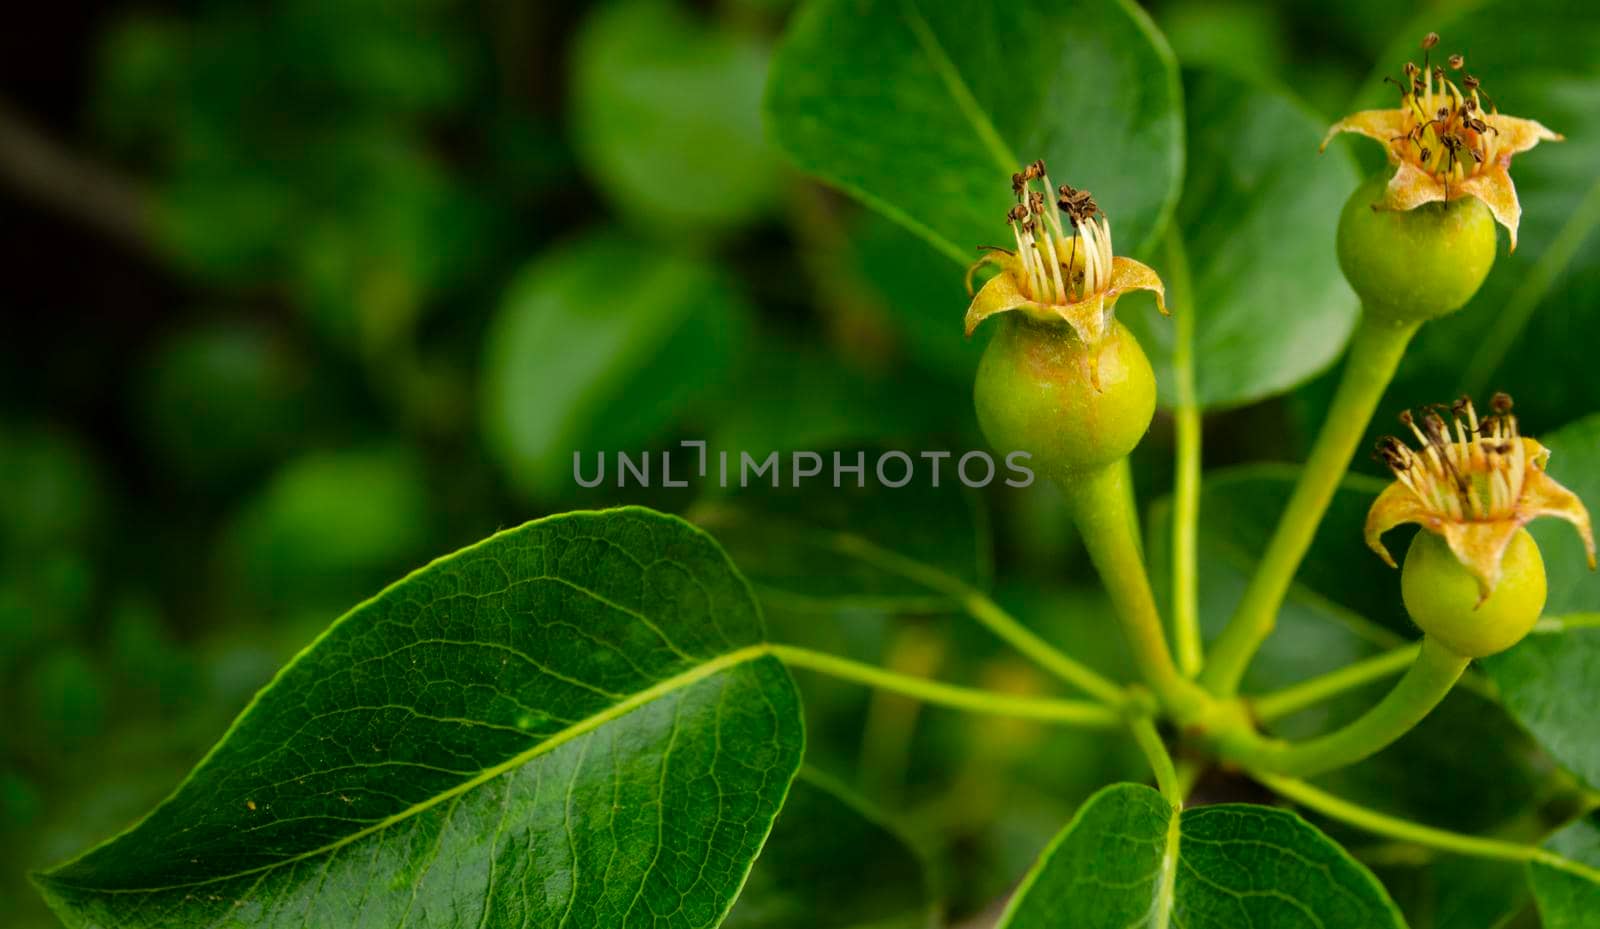 Green group of young pears on tree branch, selective focus close up